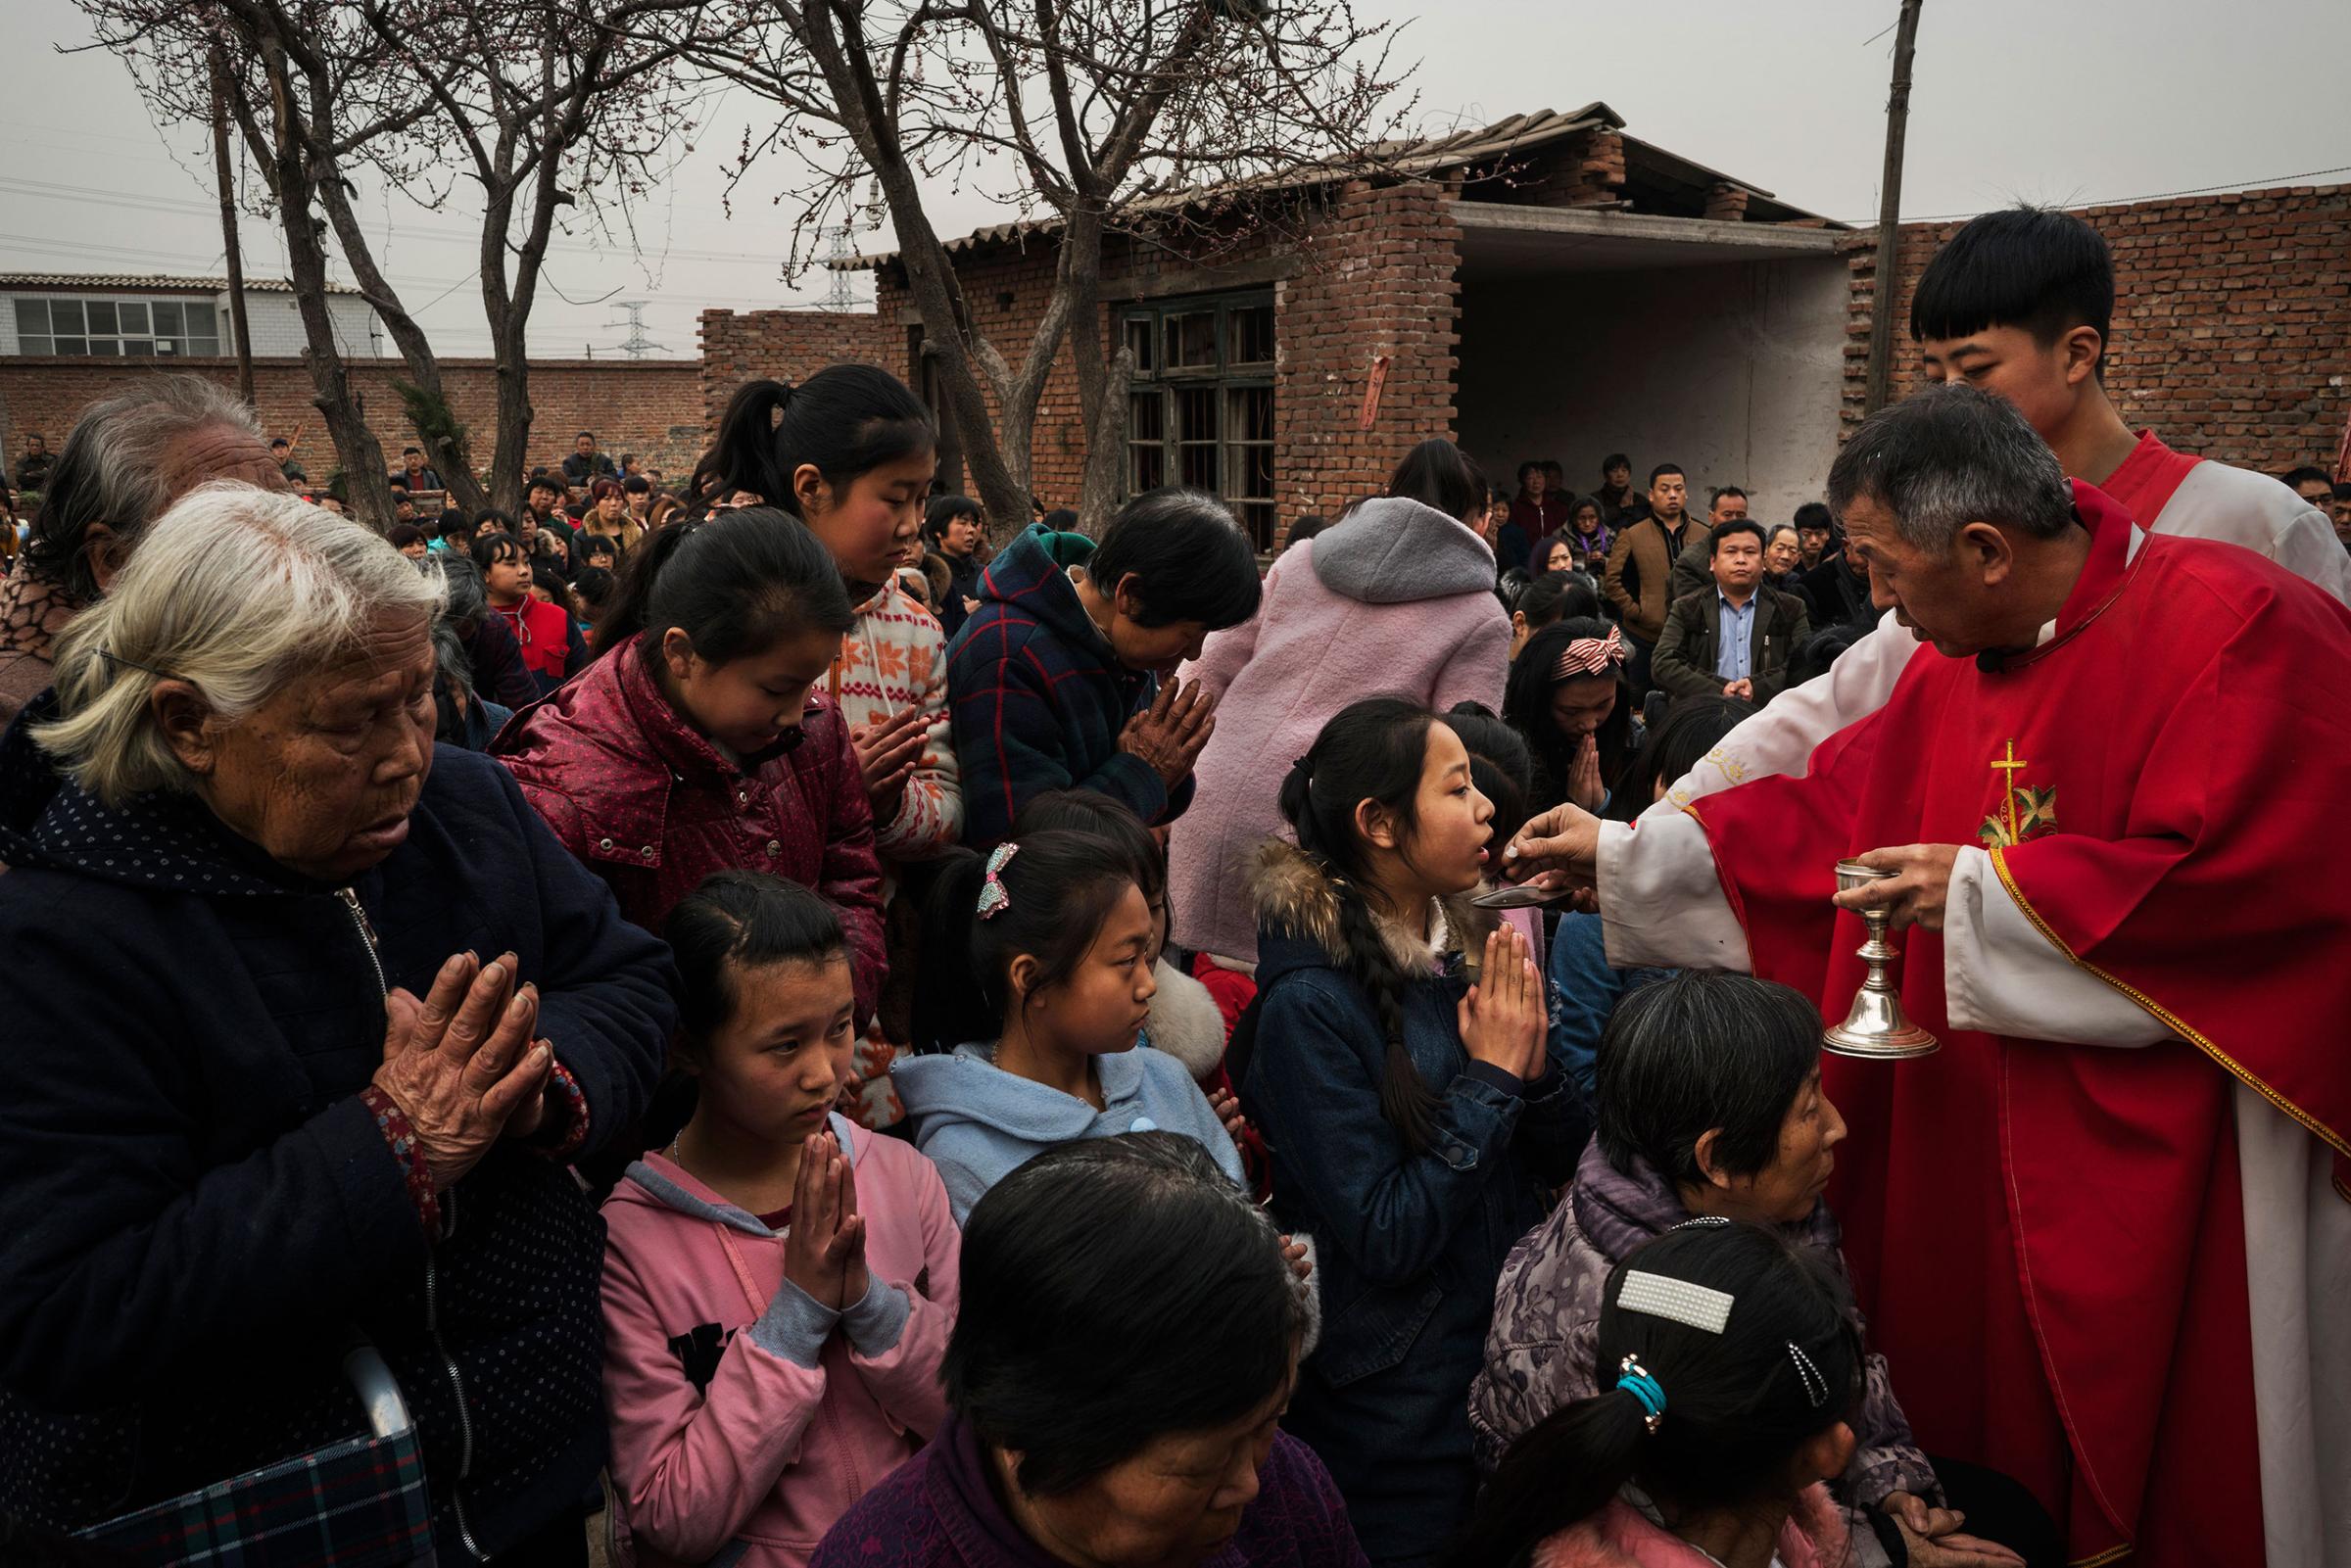 Villagers receive Communion from dissident Catholic Priest Dong Baolu at an underground Palm Sunday service in the yard of a house in Youtong village, Shijiazhuang, China, March 20, 2016.